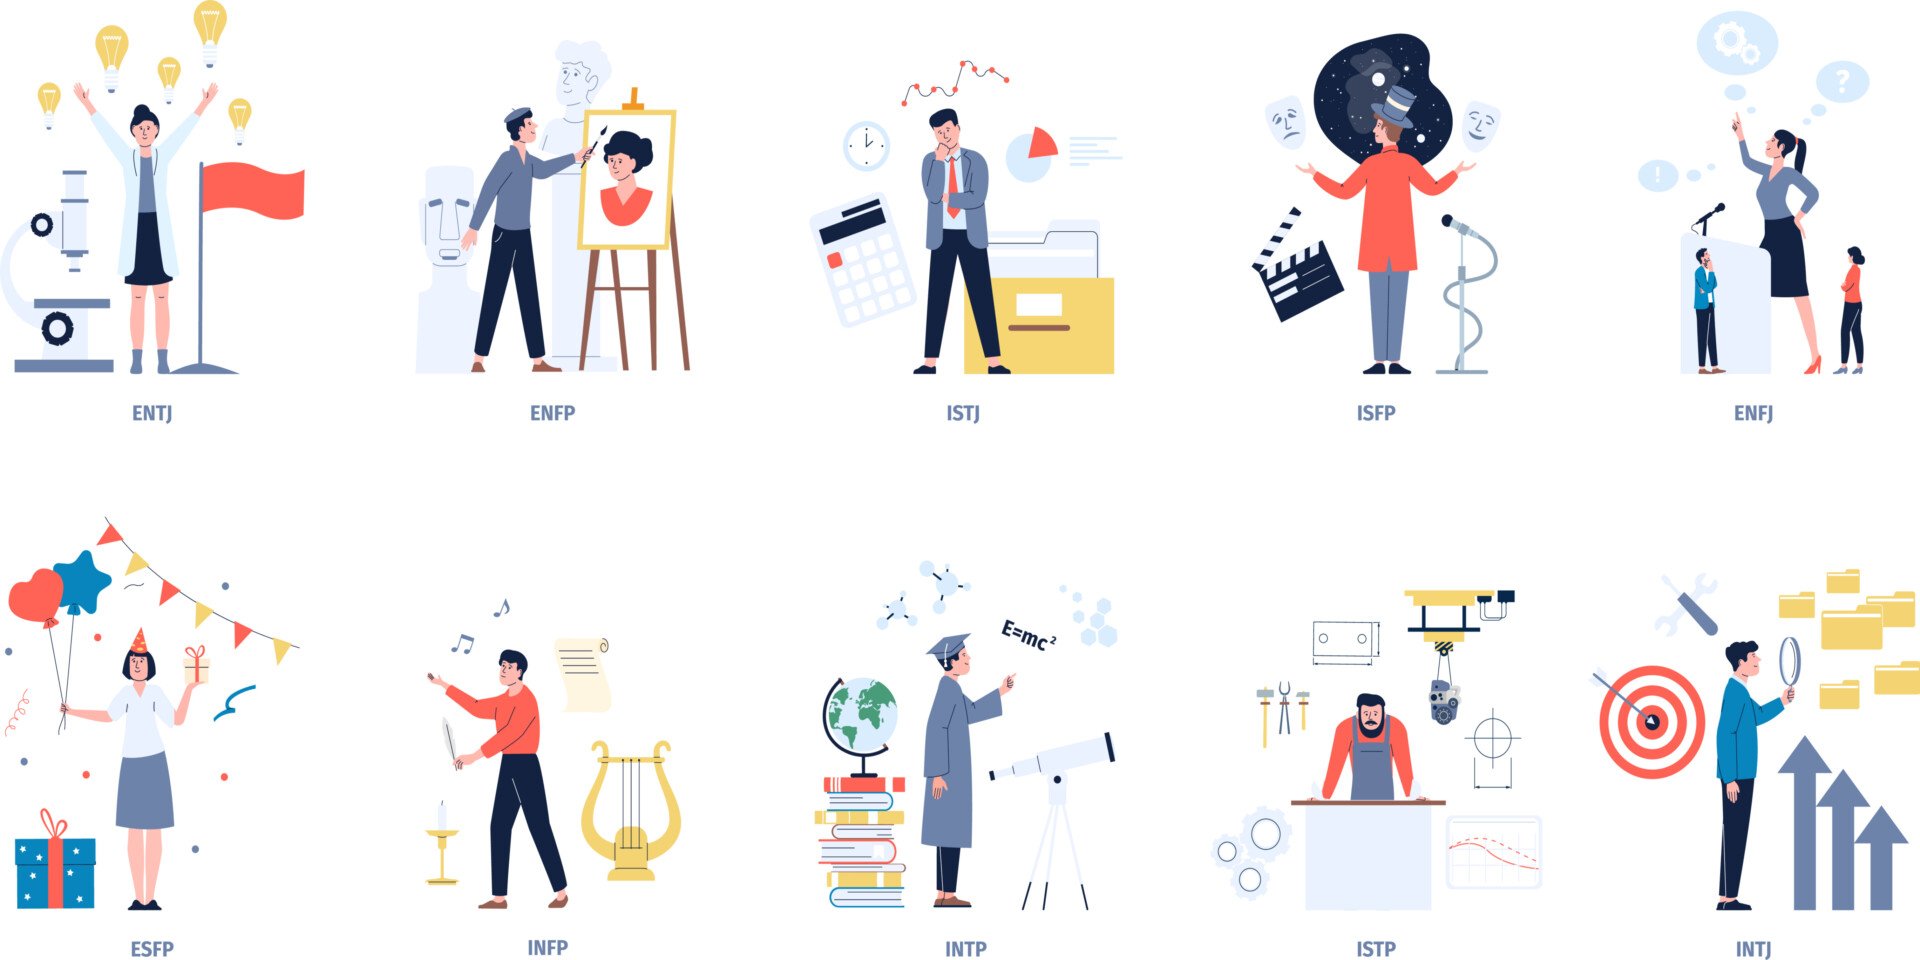 small illustrations of the MBTI personality types - a person representing each type